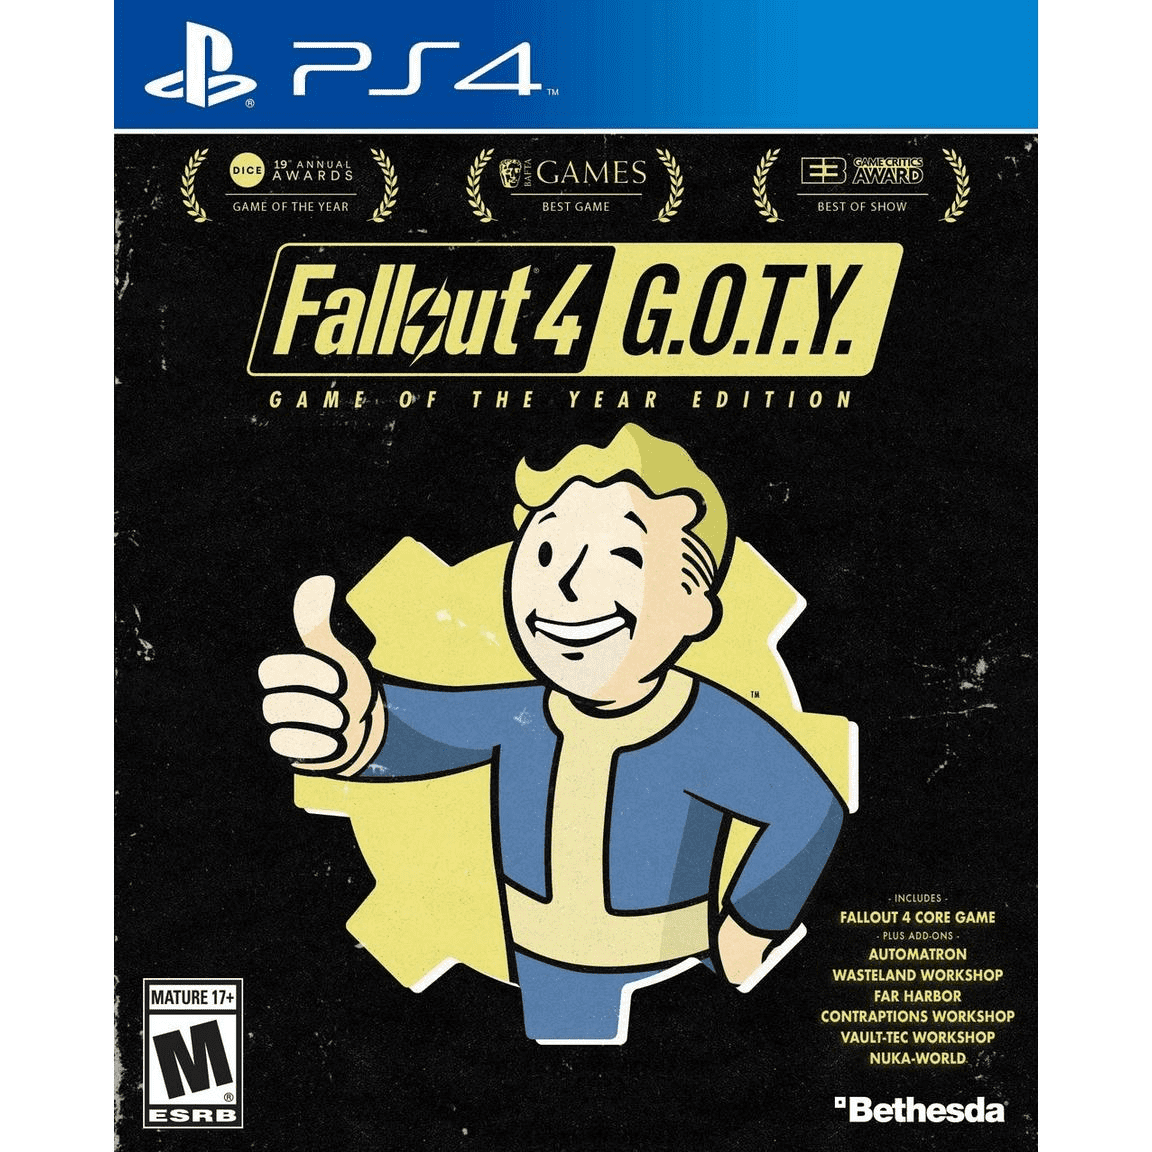 Year Steelbook Game (PS4) Bethesda 4 the Fallout of